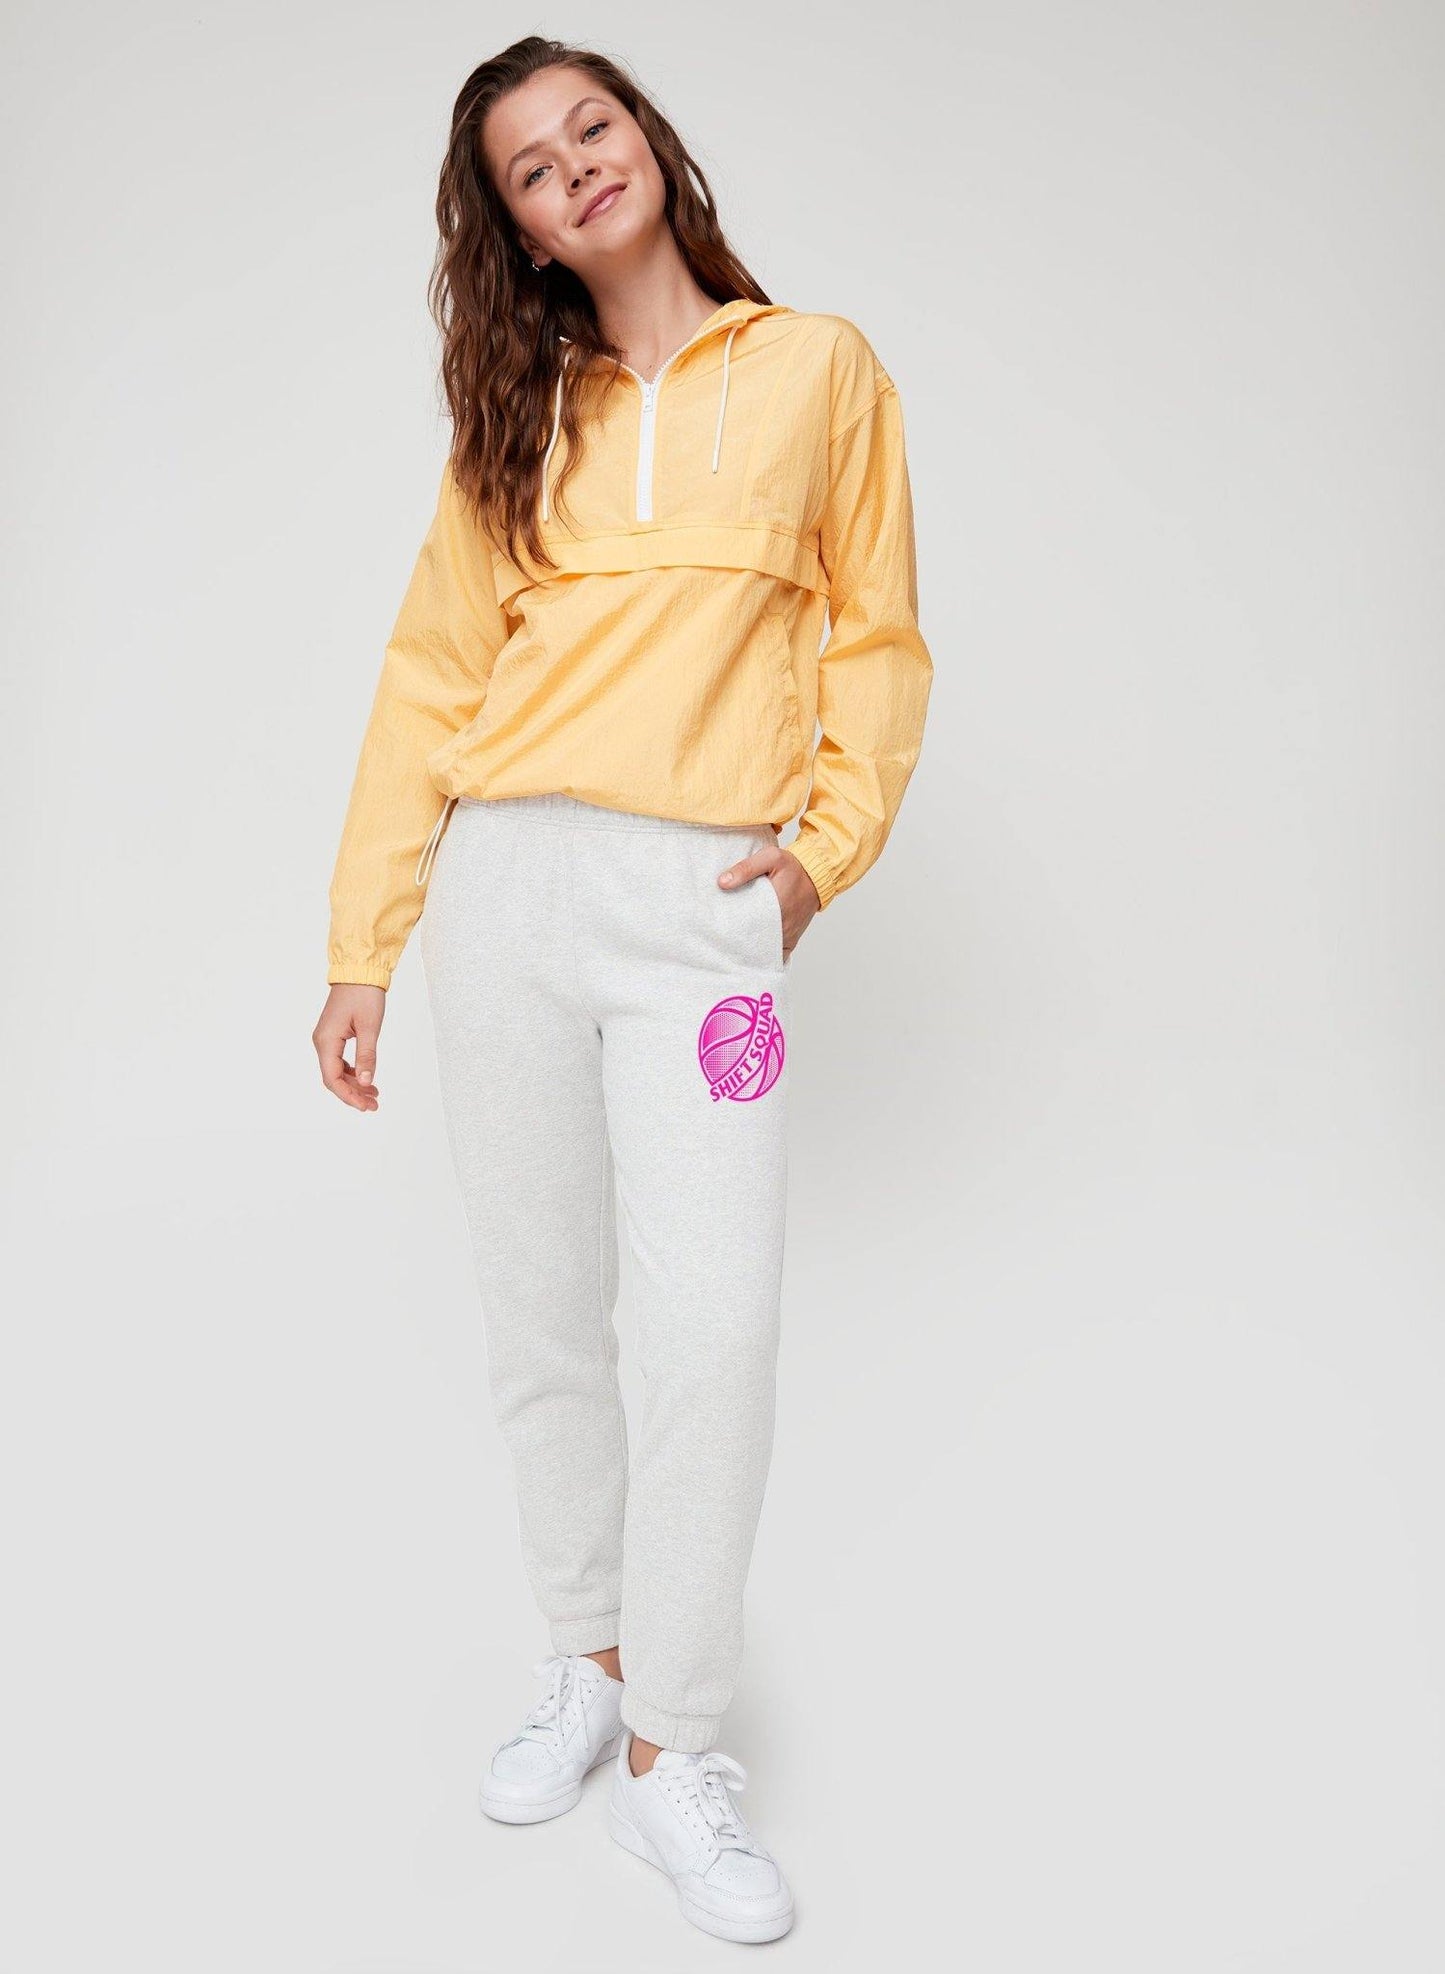 White and Pink Shiftsquad Women's Sweatpants Spring and Summer Line - Shiftsquad